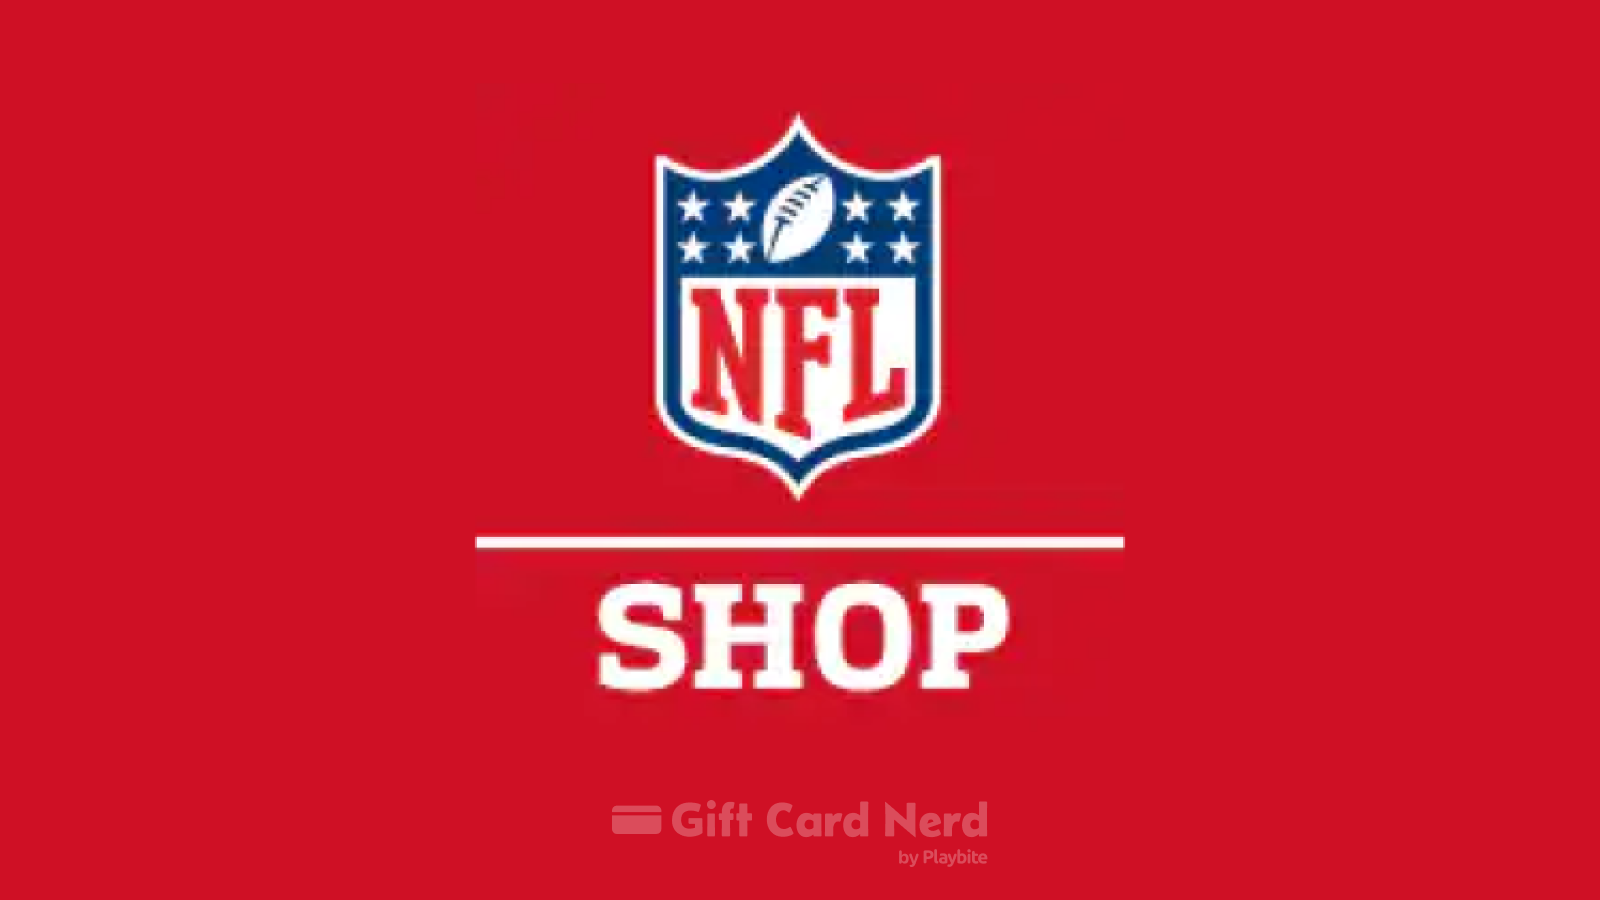 Does GameStop Sell NFL Shop Gift Cards?